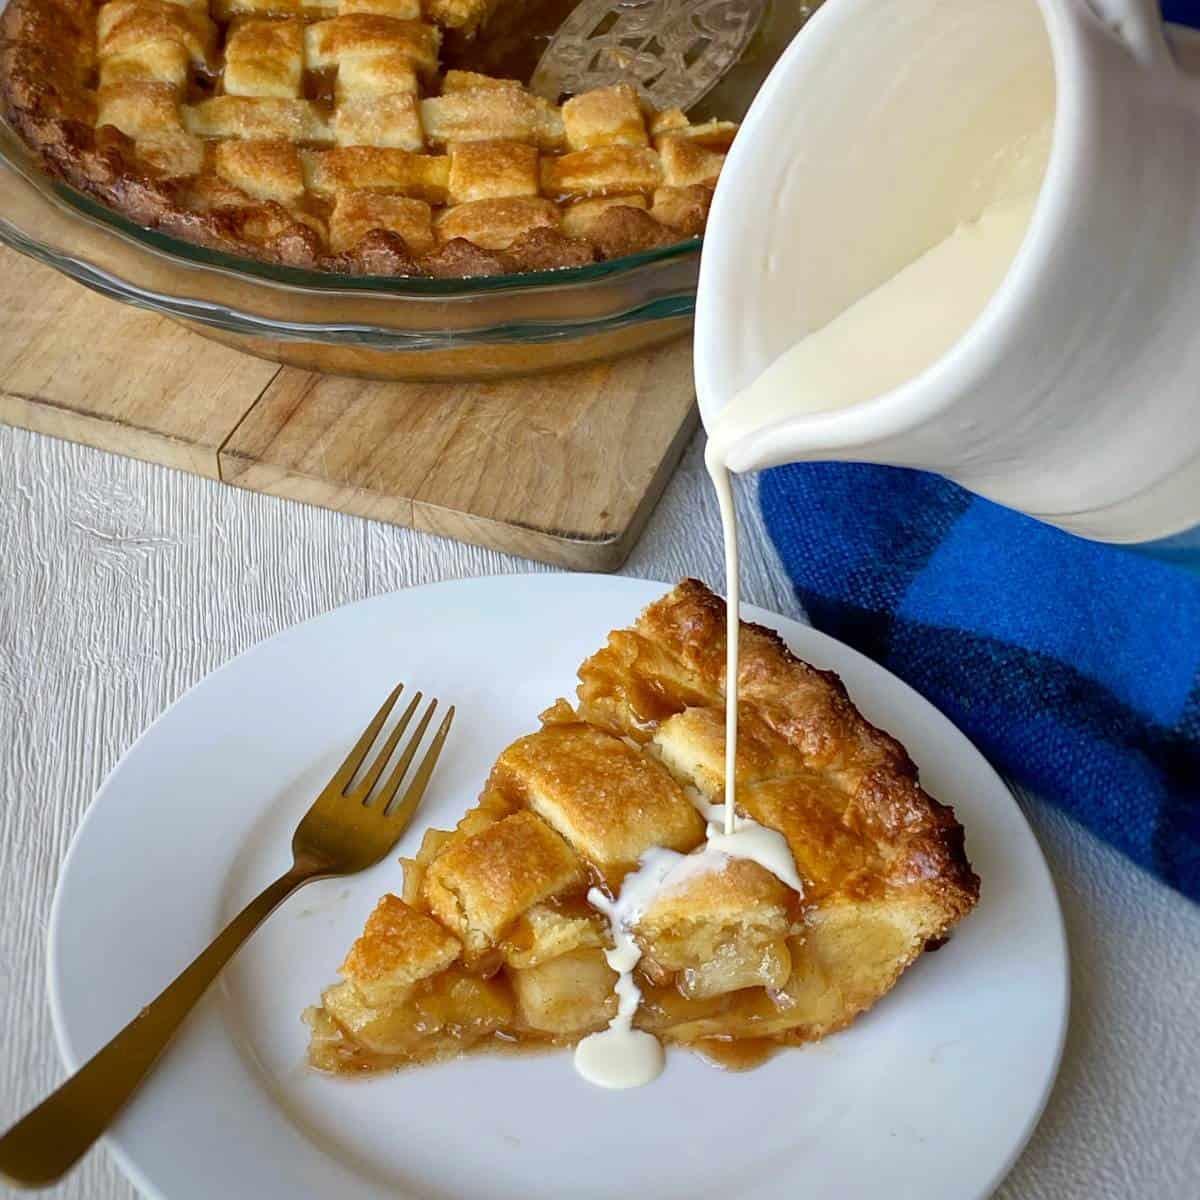 A slice of apple pie on a white plate with cream being poured over it